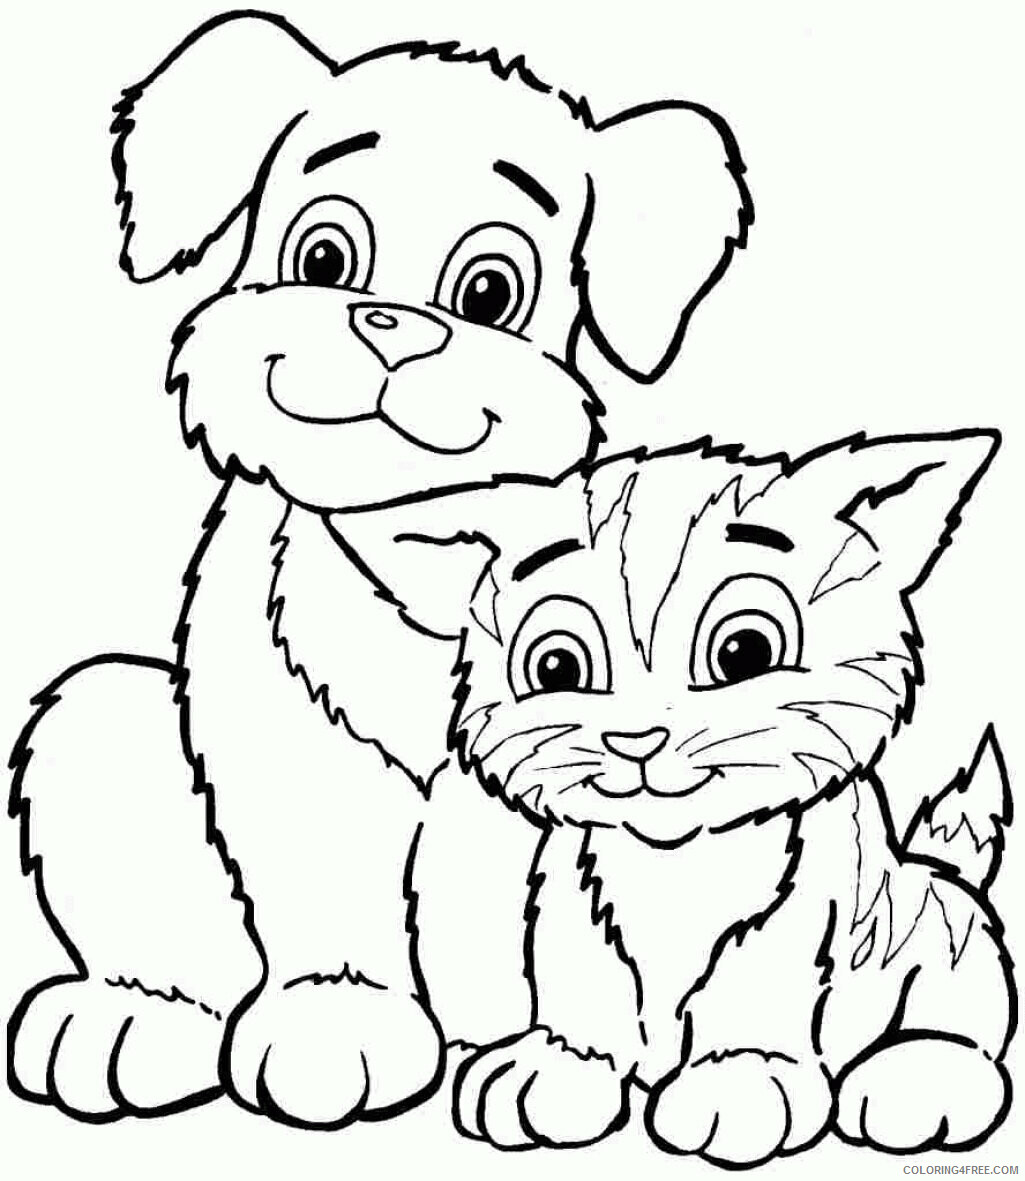 Animals Coloring Pages Free Printable Sheets for kids free 2021 a 0976 Coloring4free